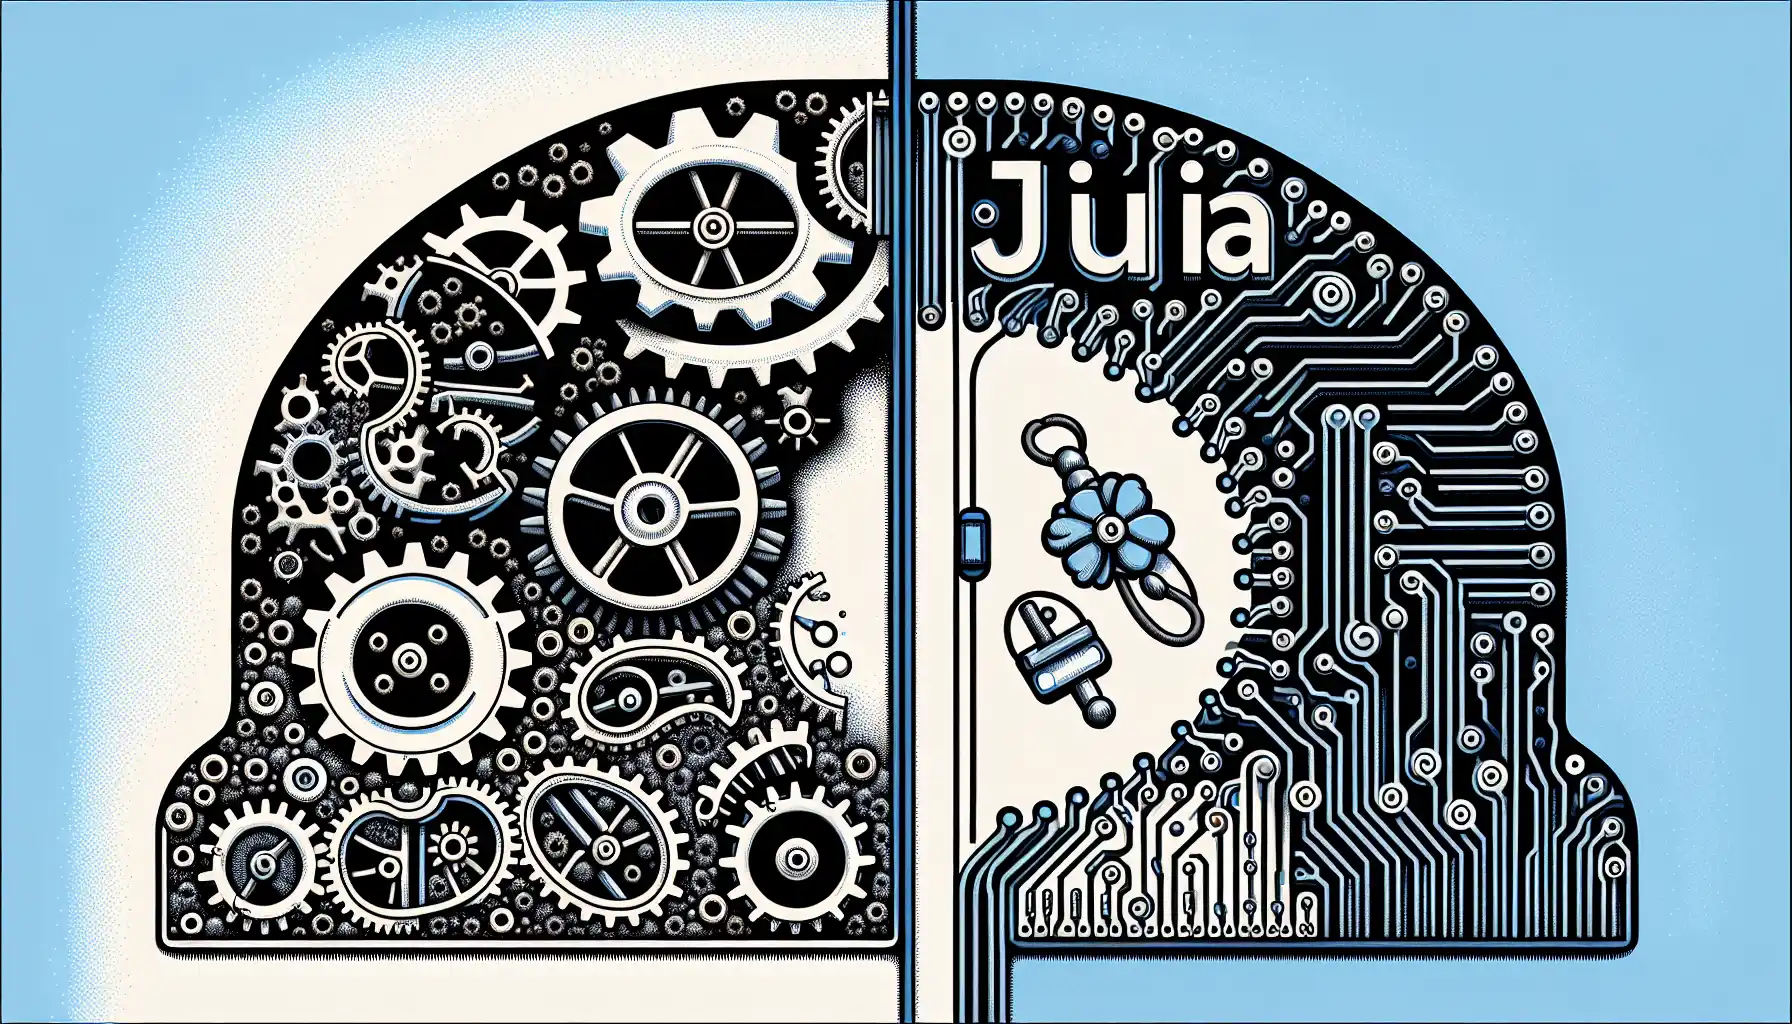 Key Differences Between MATLAB and Julia